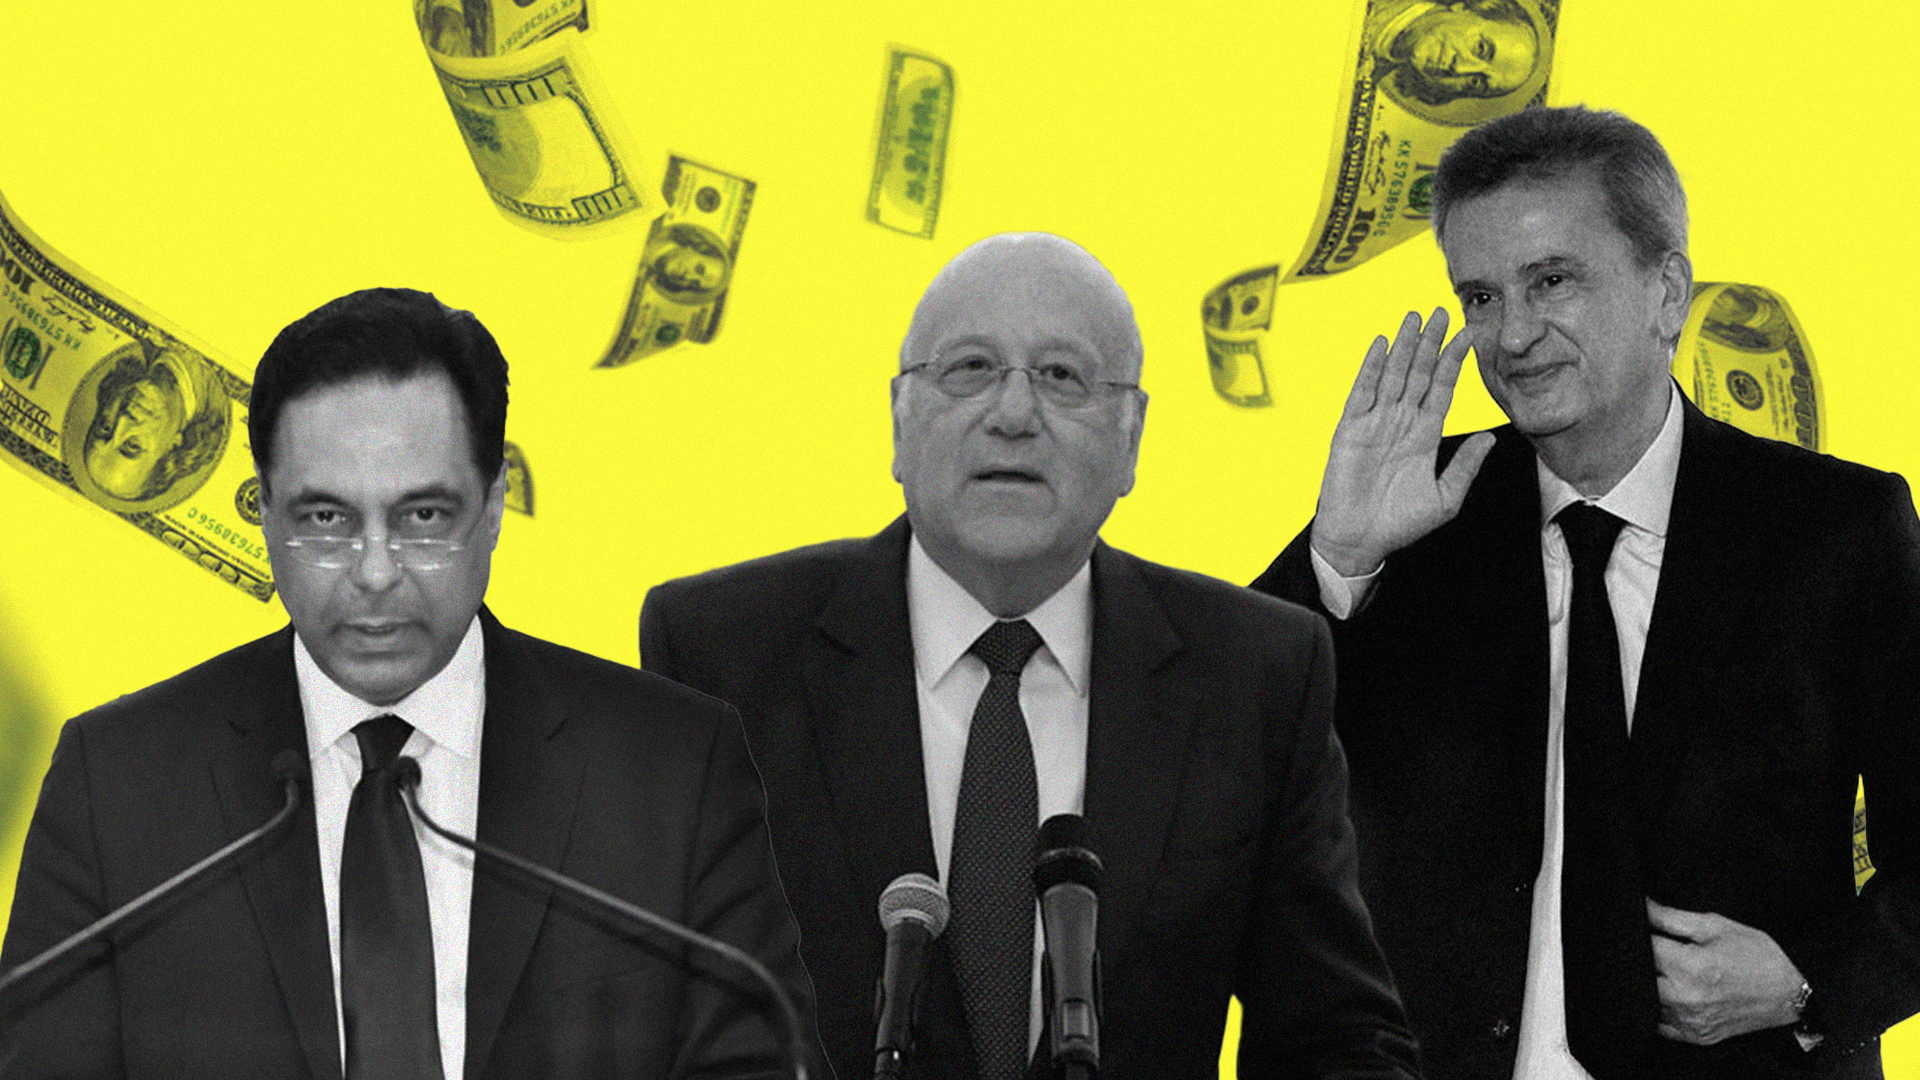 Pandora Papers Article: Collage of Lebanese officials with a yellow backdrop of flying dollar bills